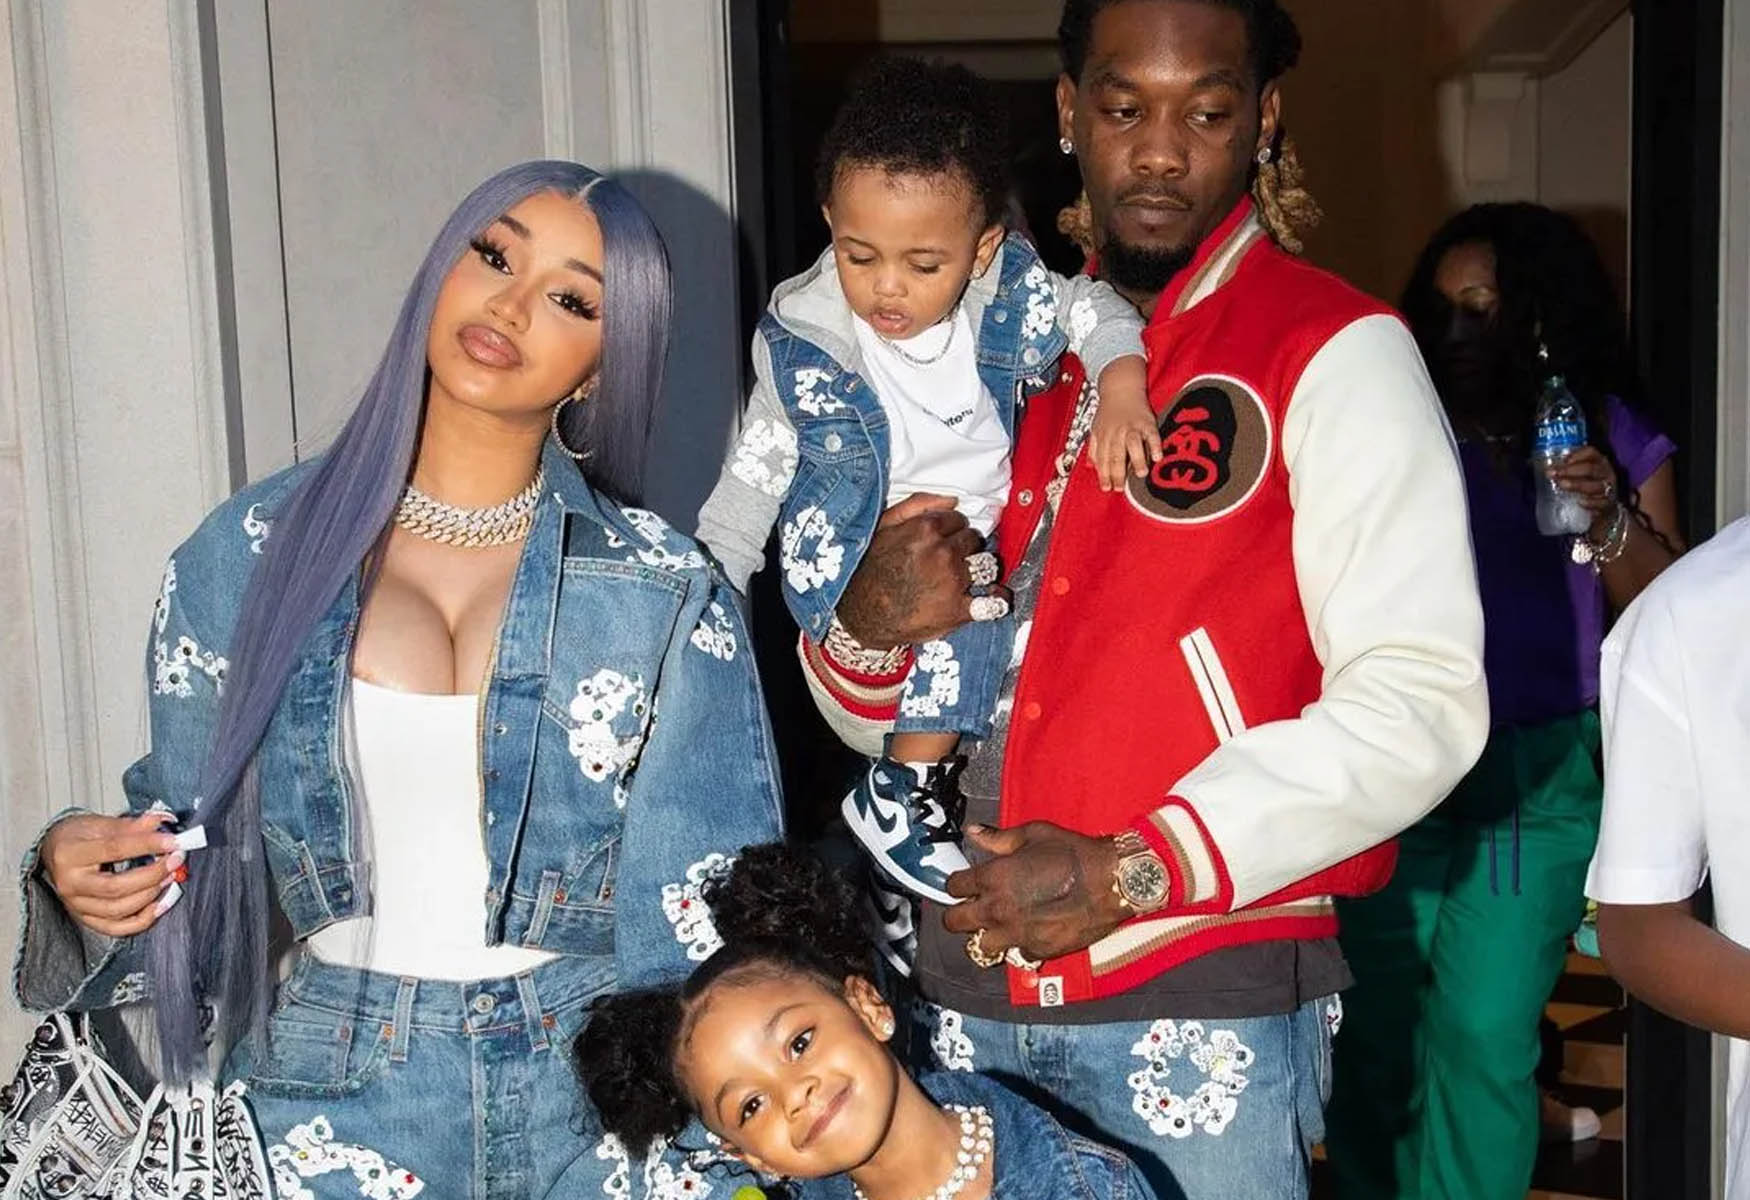 Cardi B And Offset Celebrate Christmas Together With Their Kids Despite Breakup